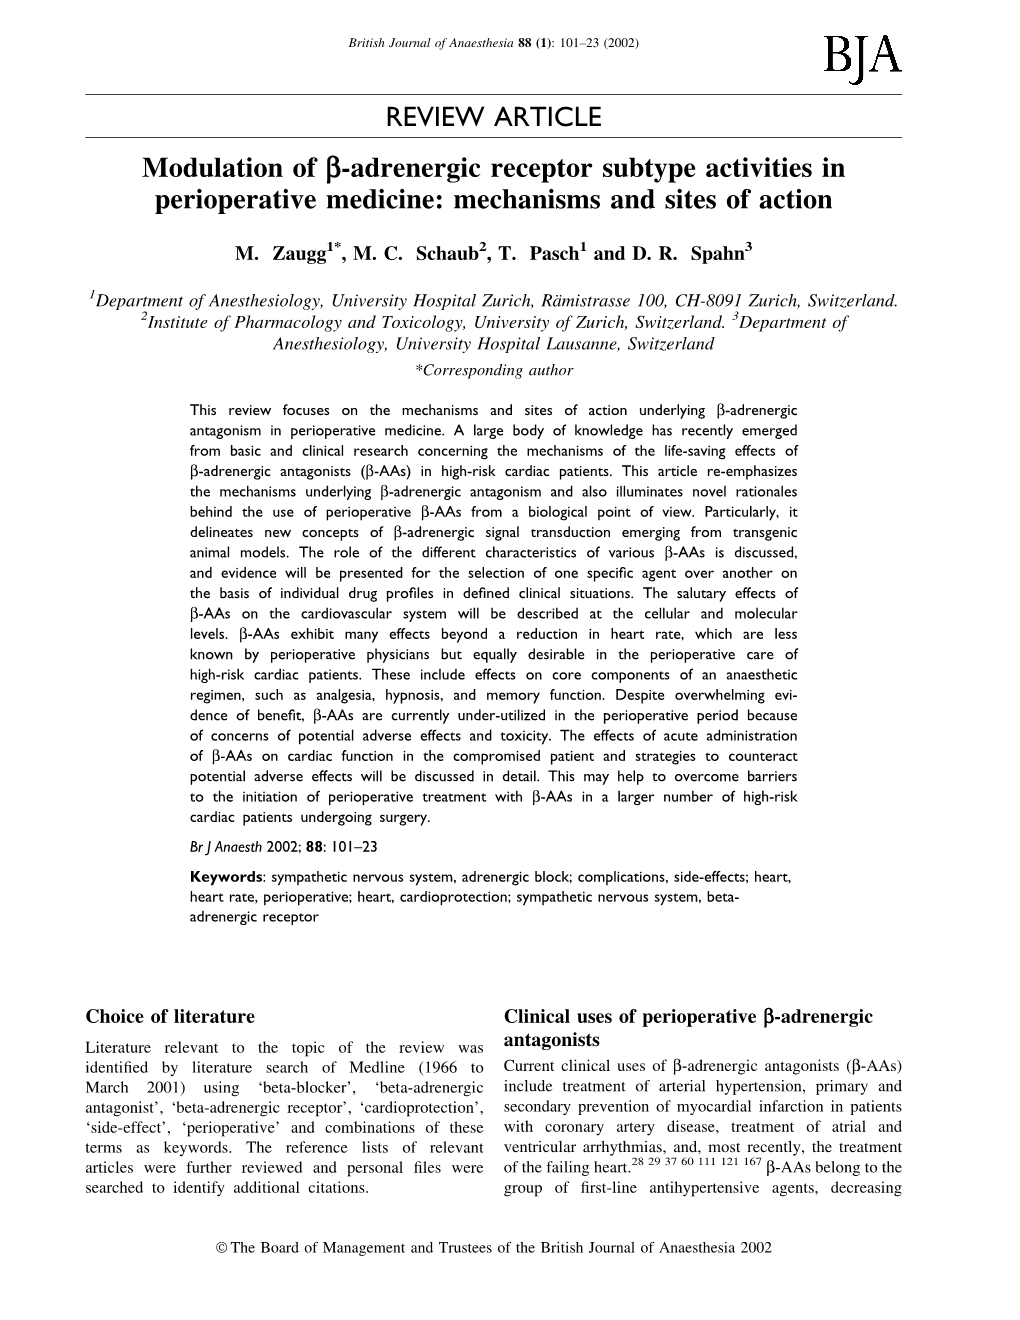 Modulation of B-Adrenergic Receptor Subtype Activities in Perioperative Medicine: Mechanisms and Sites of Action